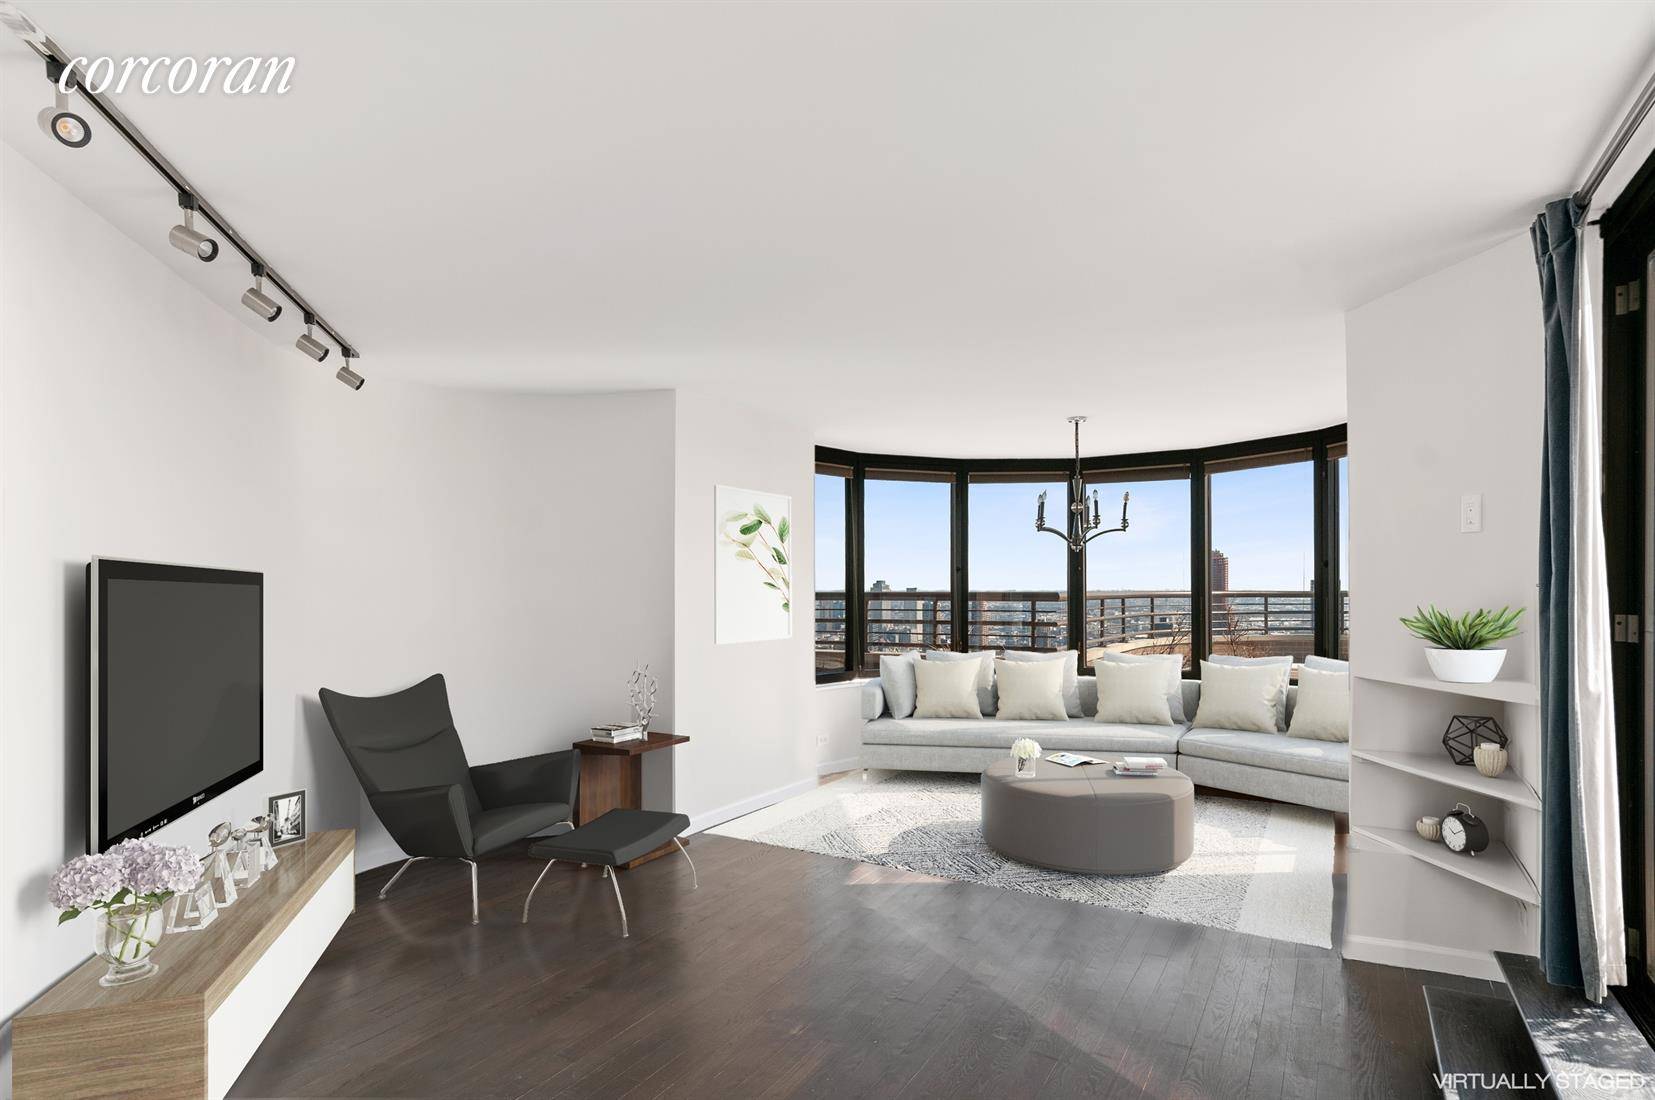 Spectacular 330 E 38th St Apt 52 O NY NY 10016 Murray Hill, Corinthian Condominiums, Move right into this Spectacular two bedroom, two bathroom Condo of 52nd Floor, With Largest ...